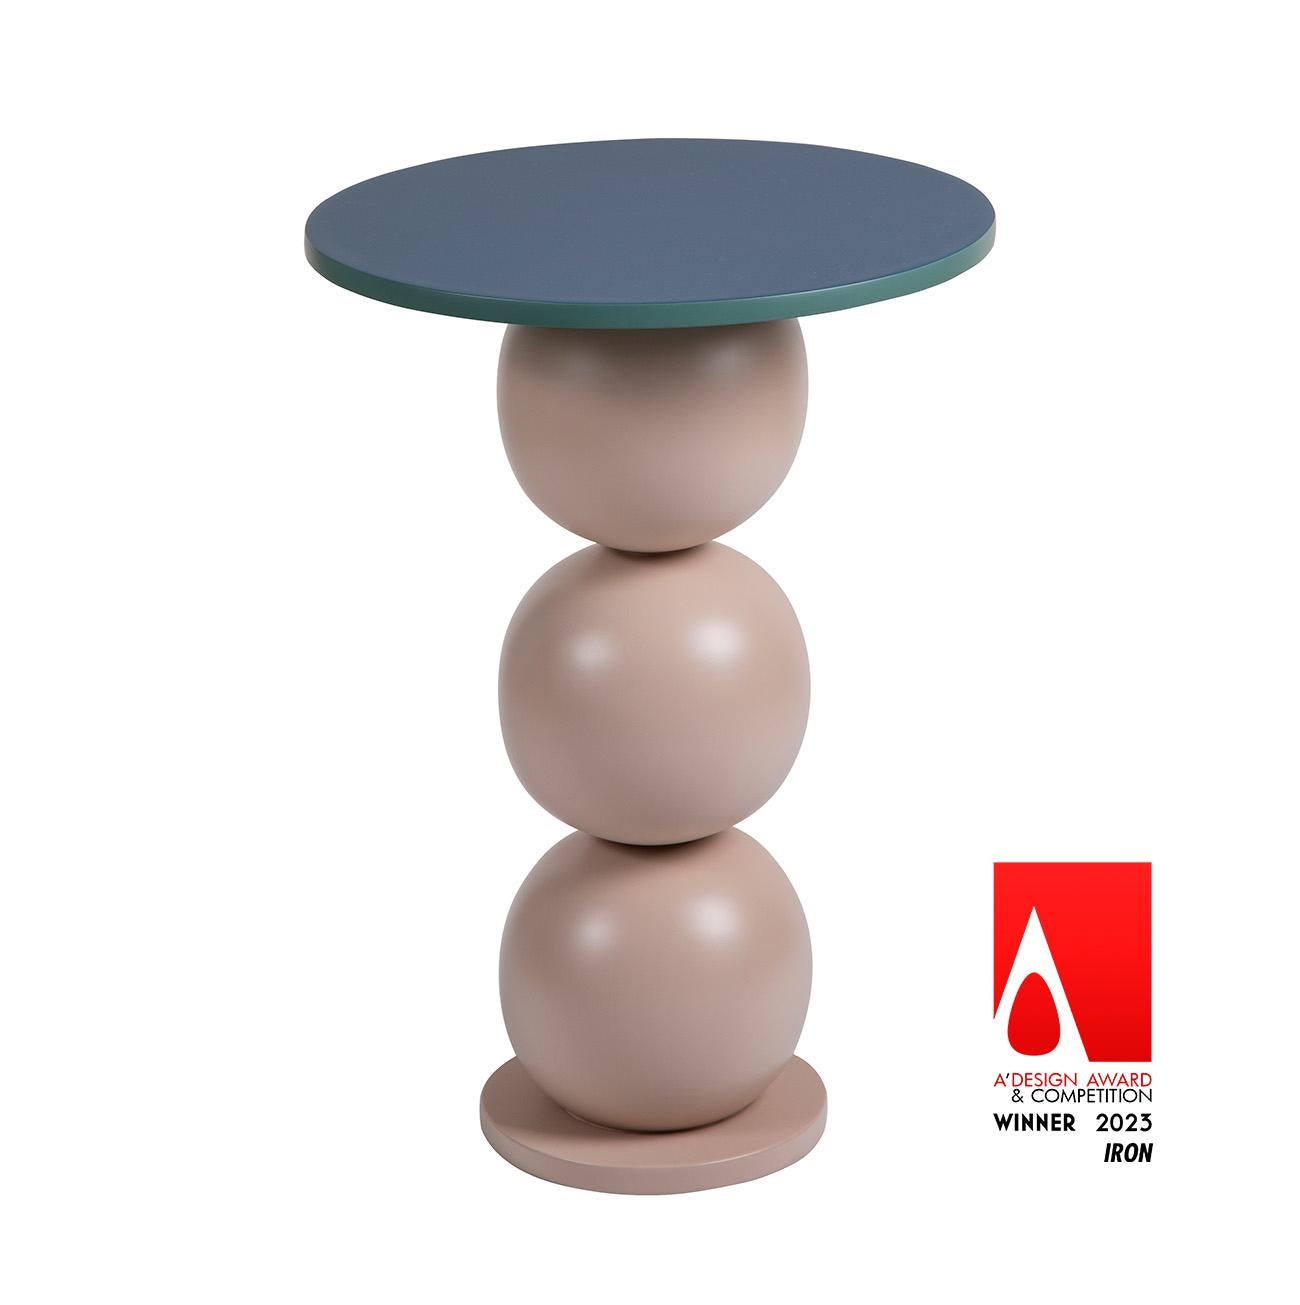 A' Design Award Iron - Furniture 2023

The side table “Dança” is a reinterpretation of the work “La Danse” by Henri Matisse. It is believed that the idea for the composition came about in 1905, while the painter watched some fishermen performing a